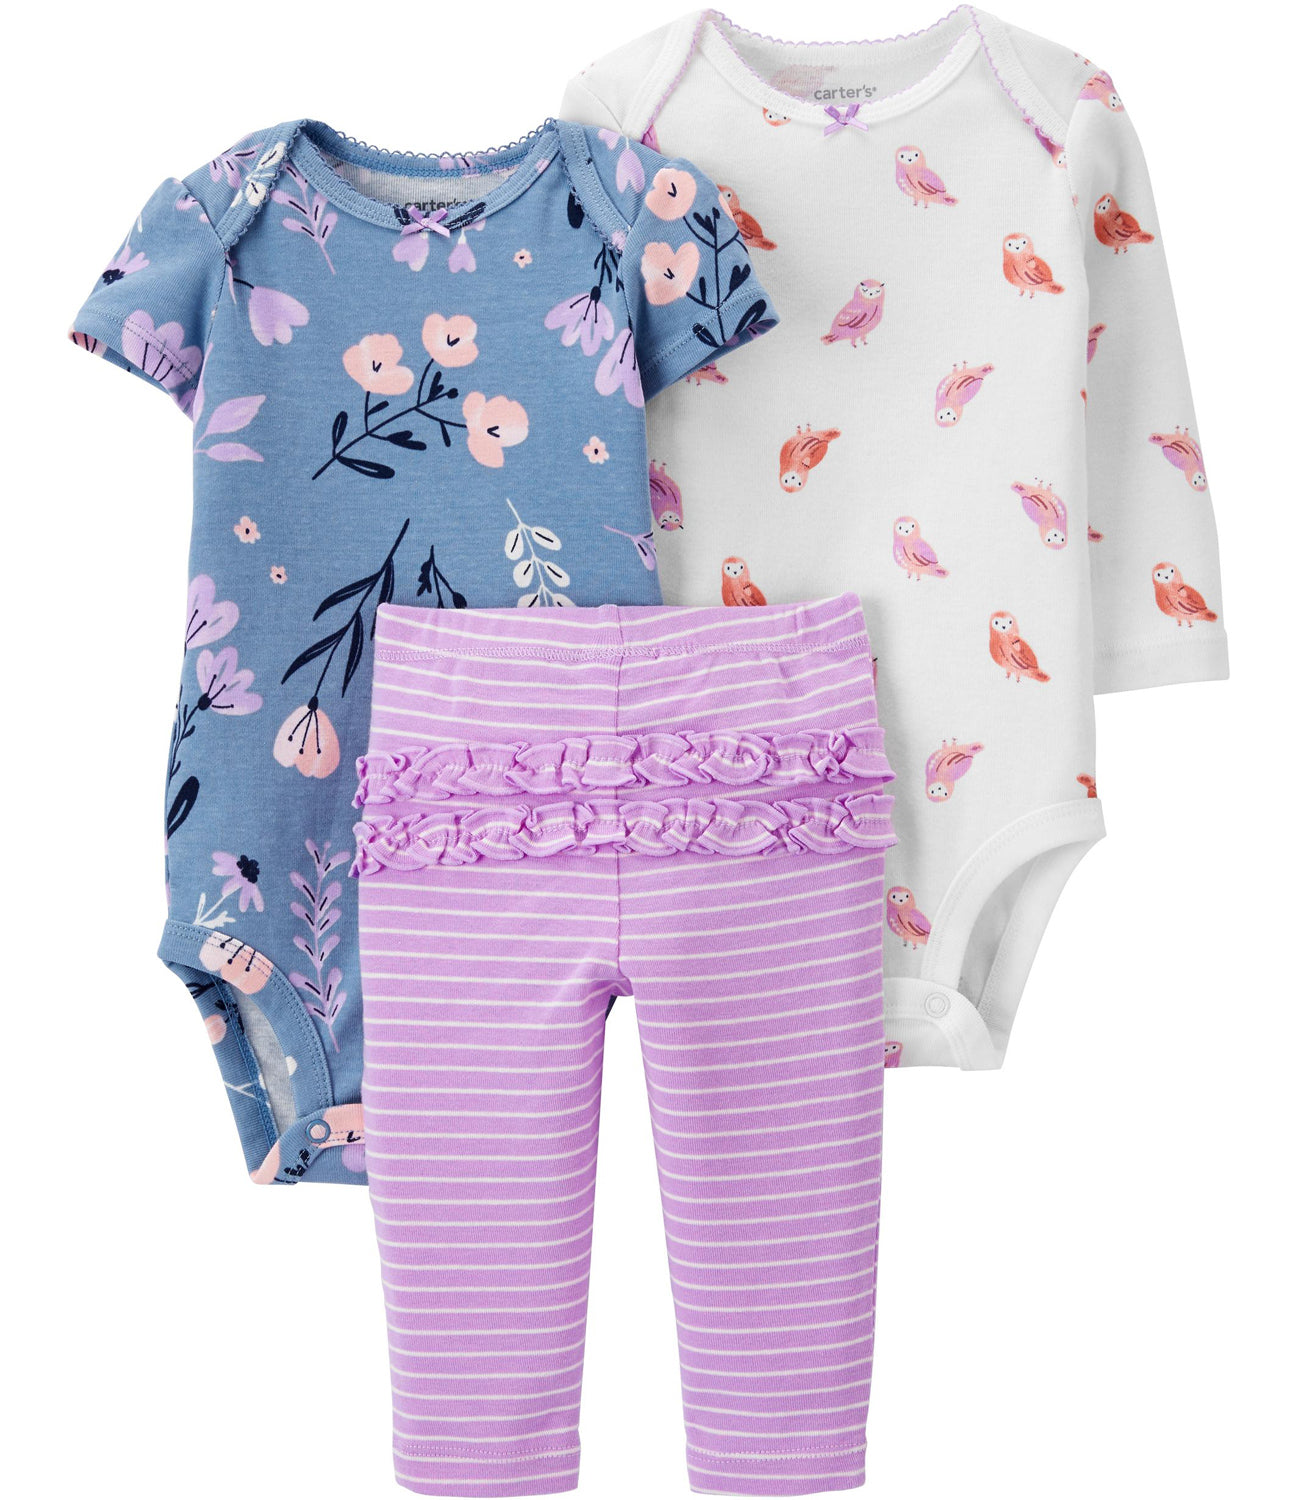 Carters Girls 0-24 Months 3-Piece Owl Outfit Set